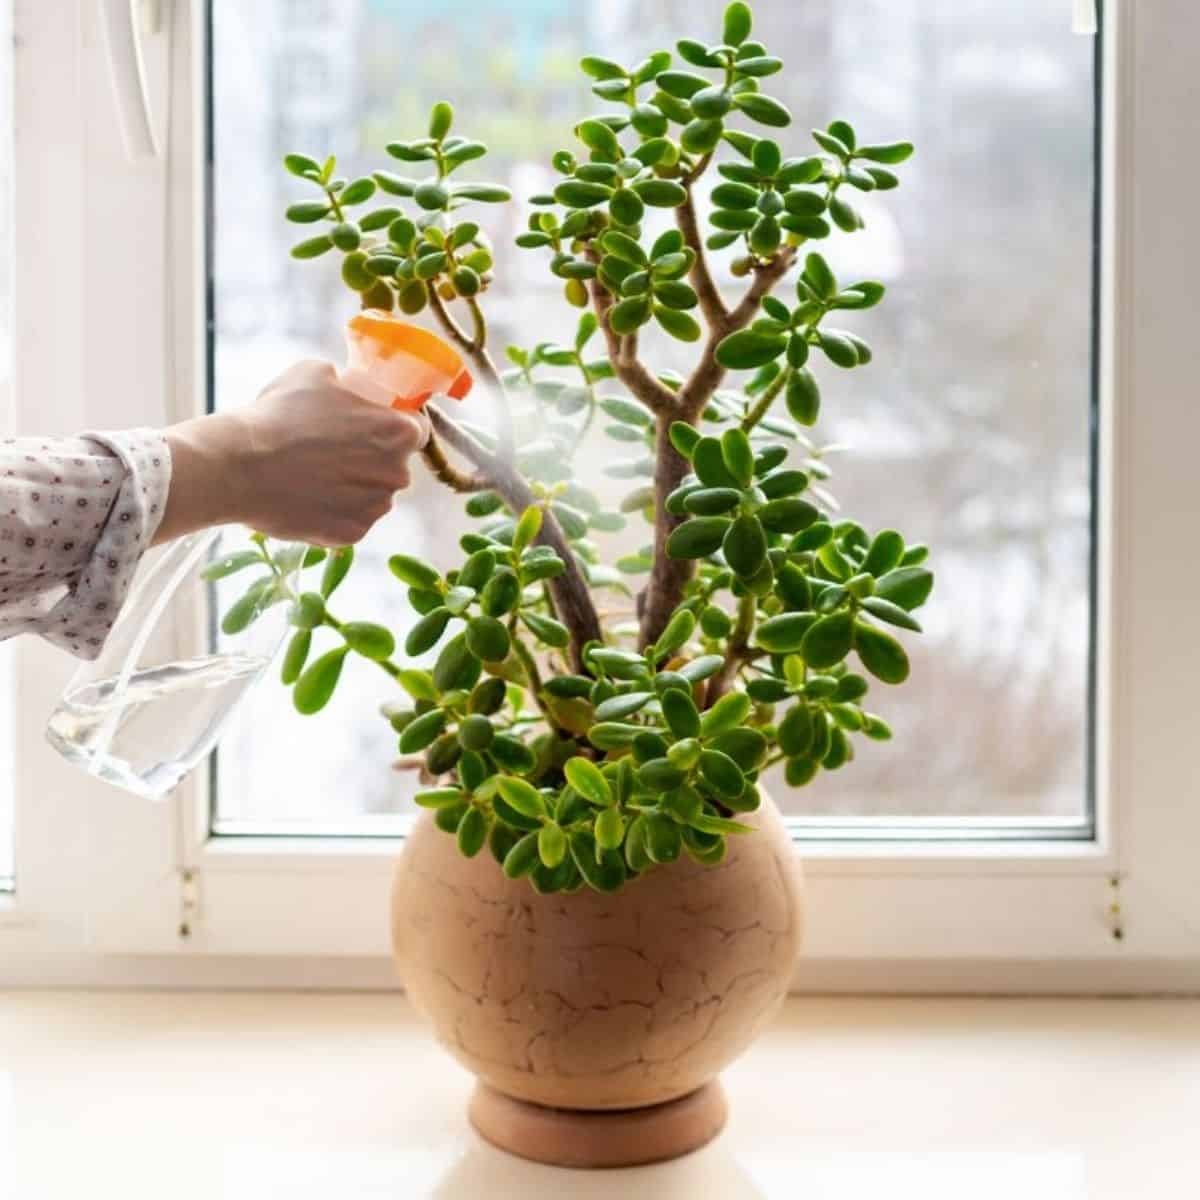 Treating Damages Caused By Jade Pests 